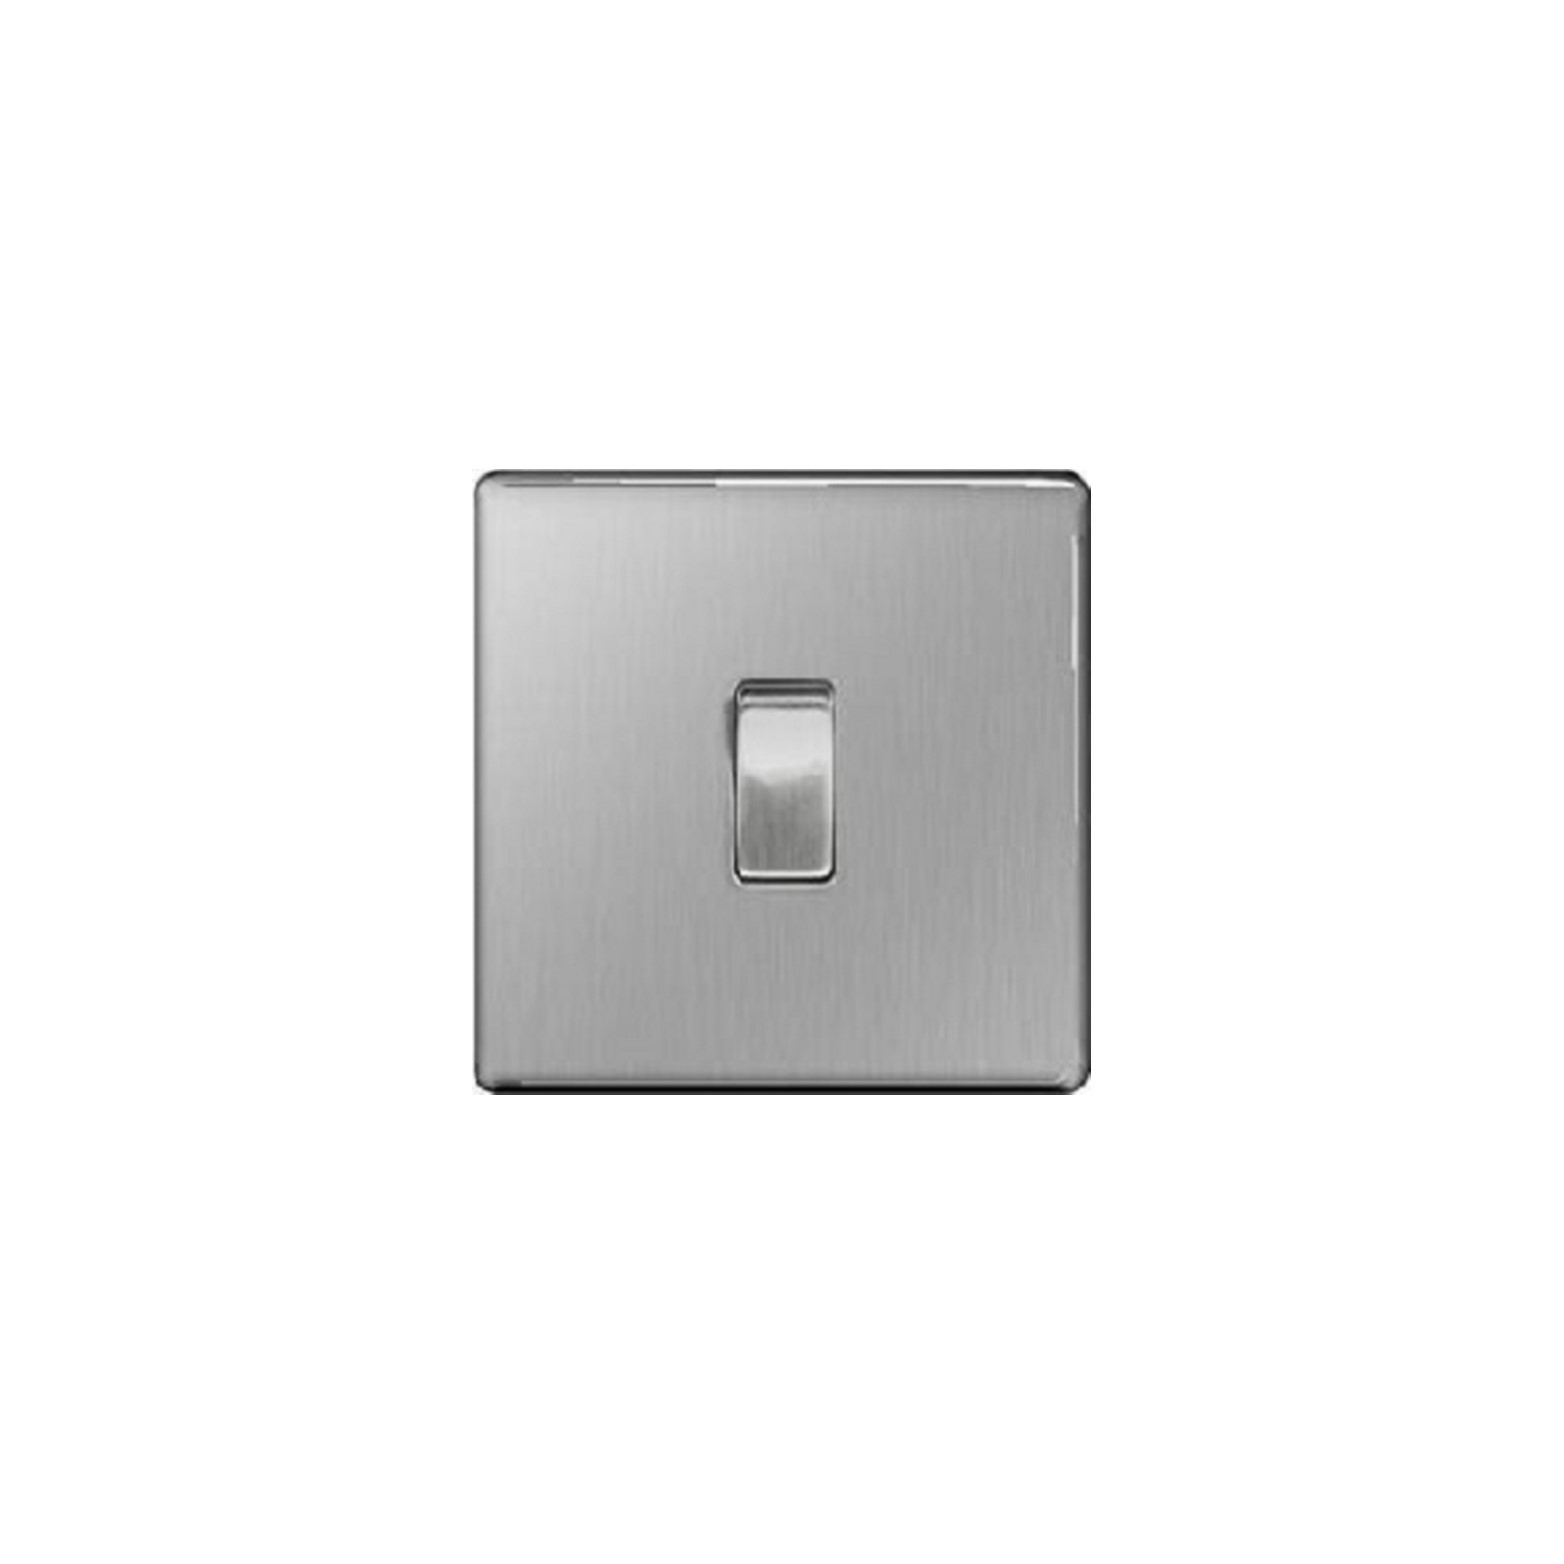 Flatplate Brushed Steel 1-Gang 2Way 10AX Switch, single screwless clip-on front plate(FBS12)